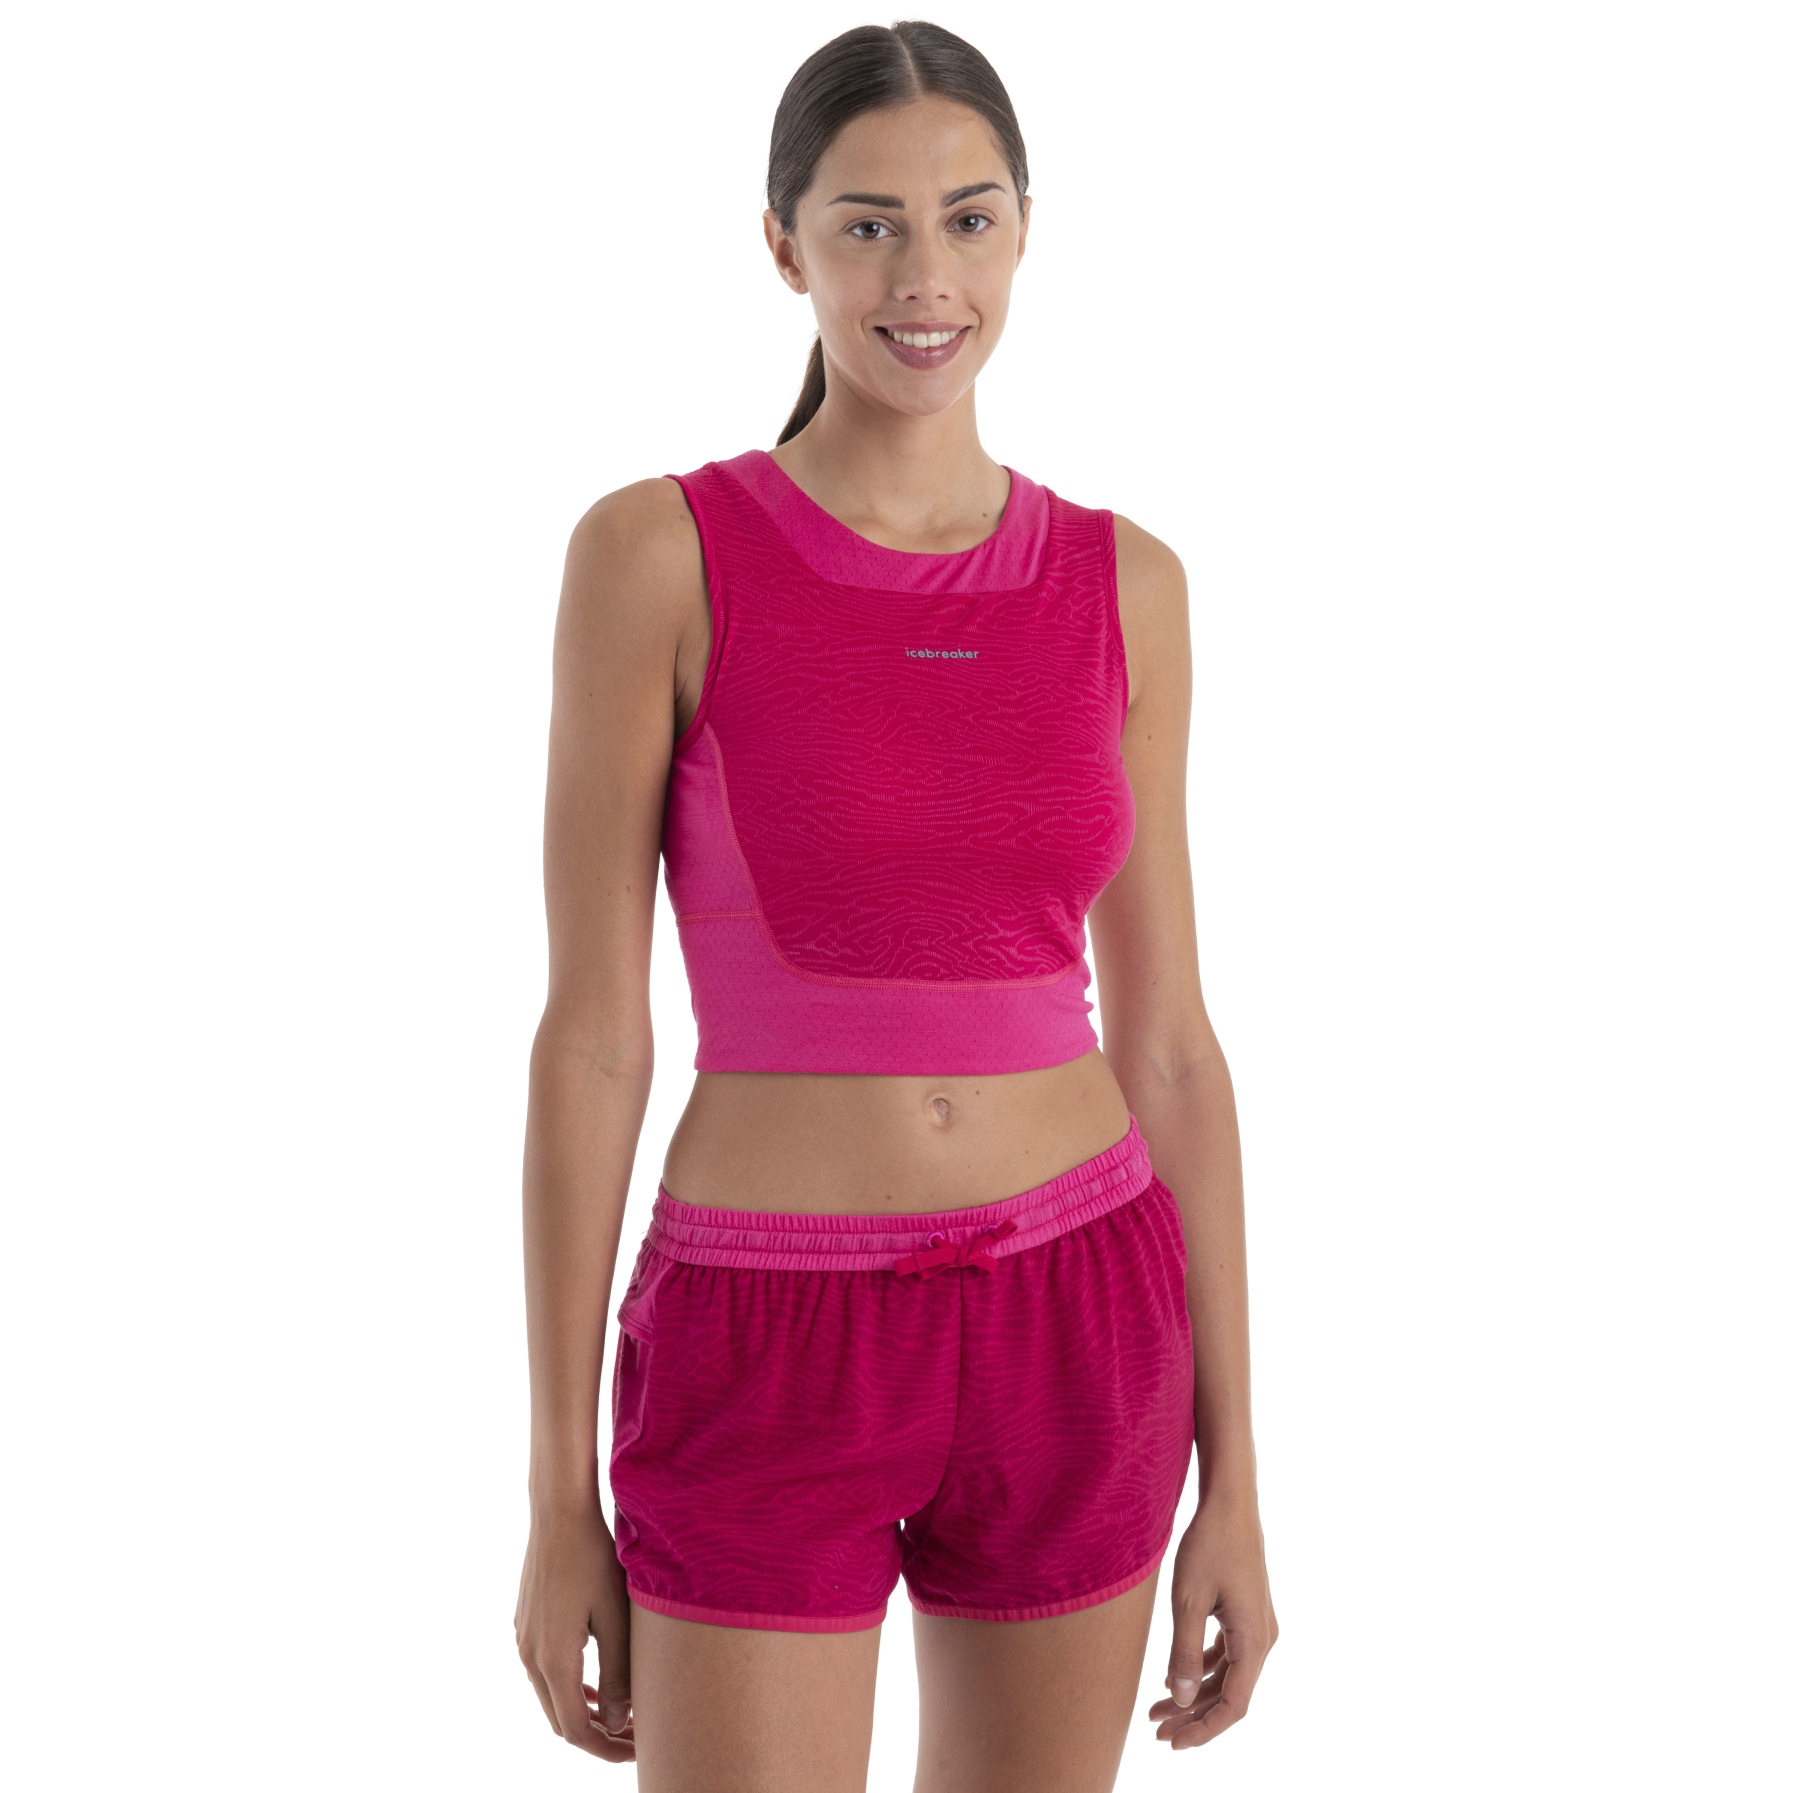 Productfoto van Icebreaker ZoneKnit™ Cropped Topo Lines BH-Shirt Dames - Electron Pink/Tempo/AOP